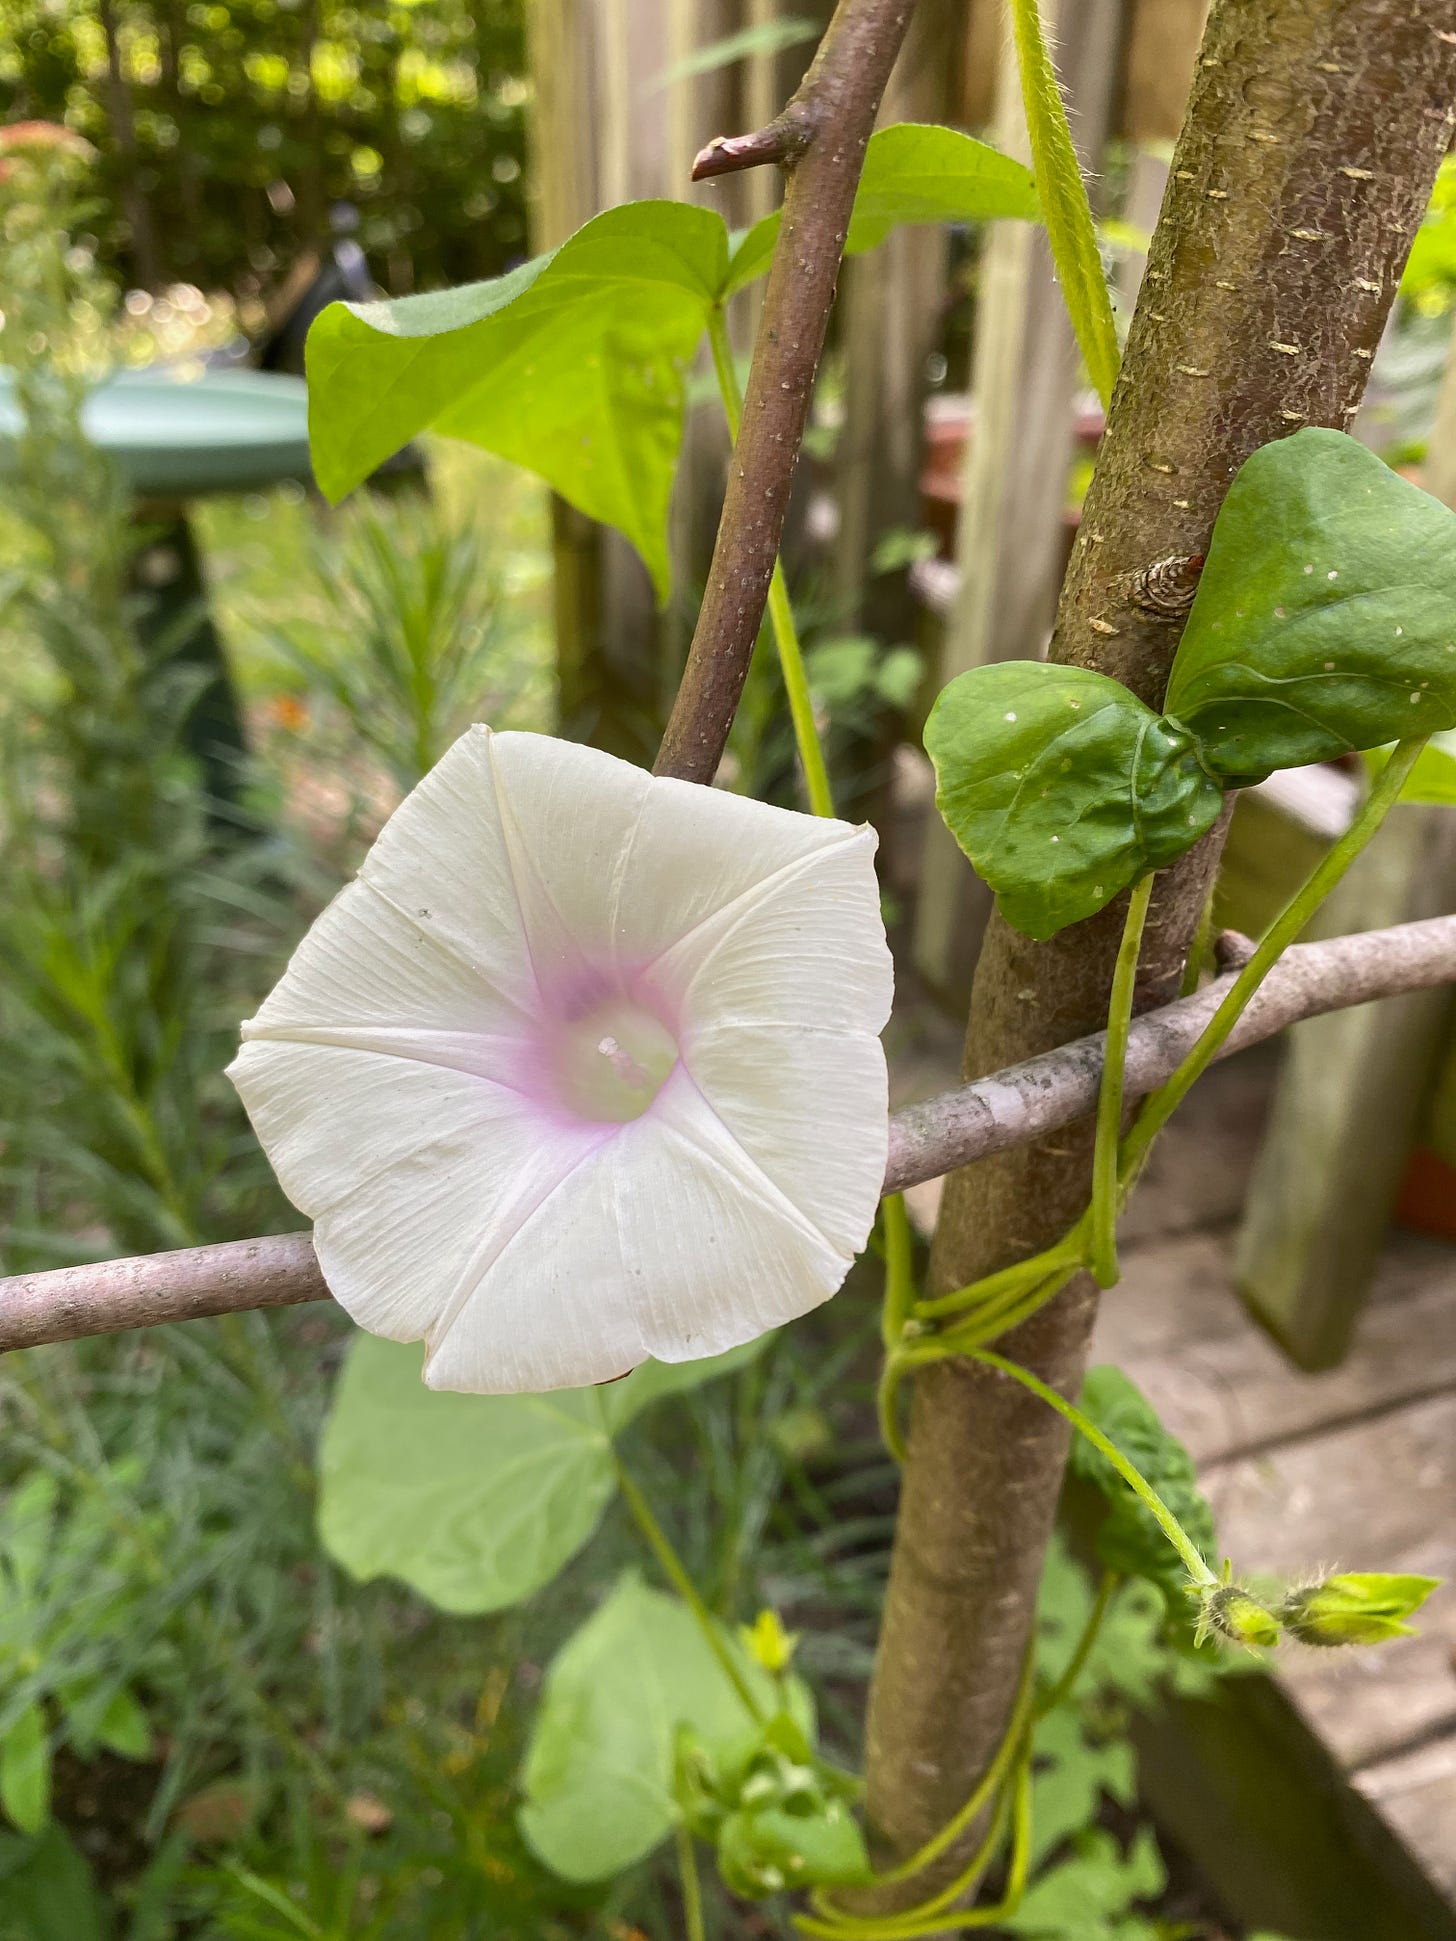 Closeup of a white morning glory flower with a pale pink center. Other garden plants and part of an arbor are visible in the background.